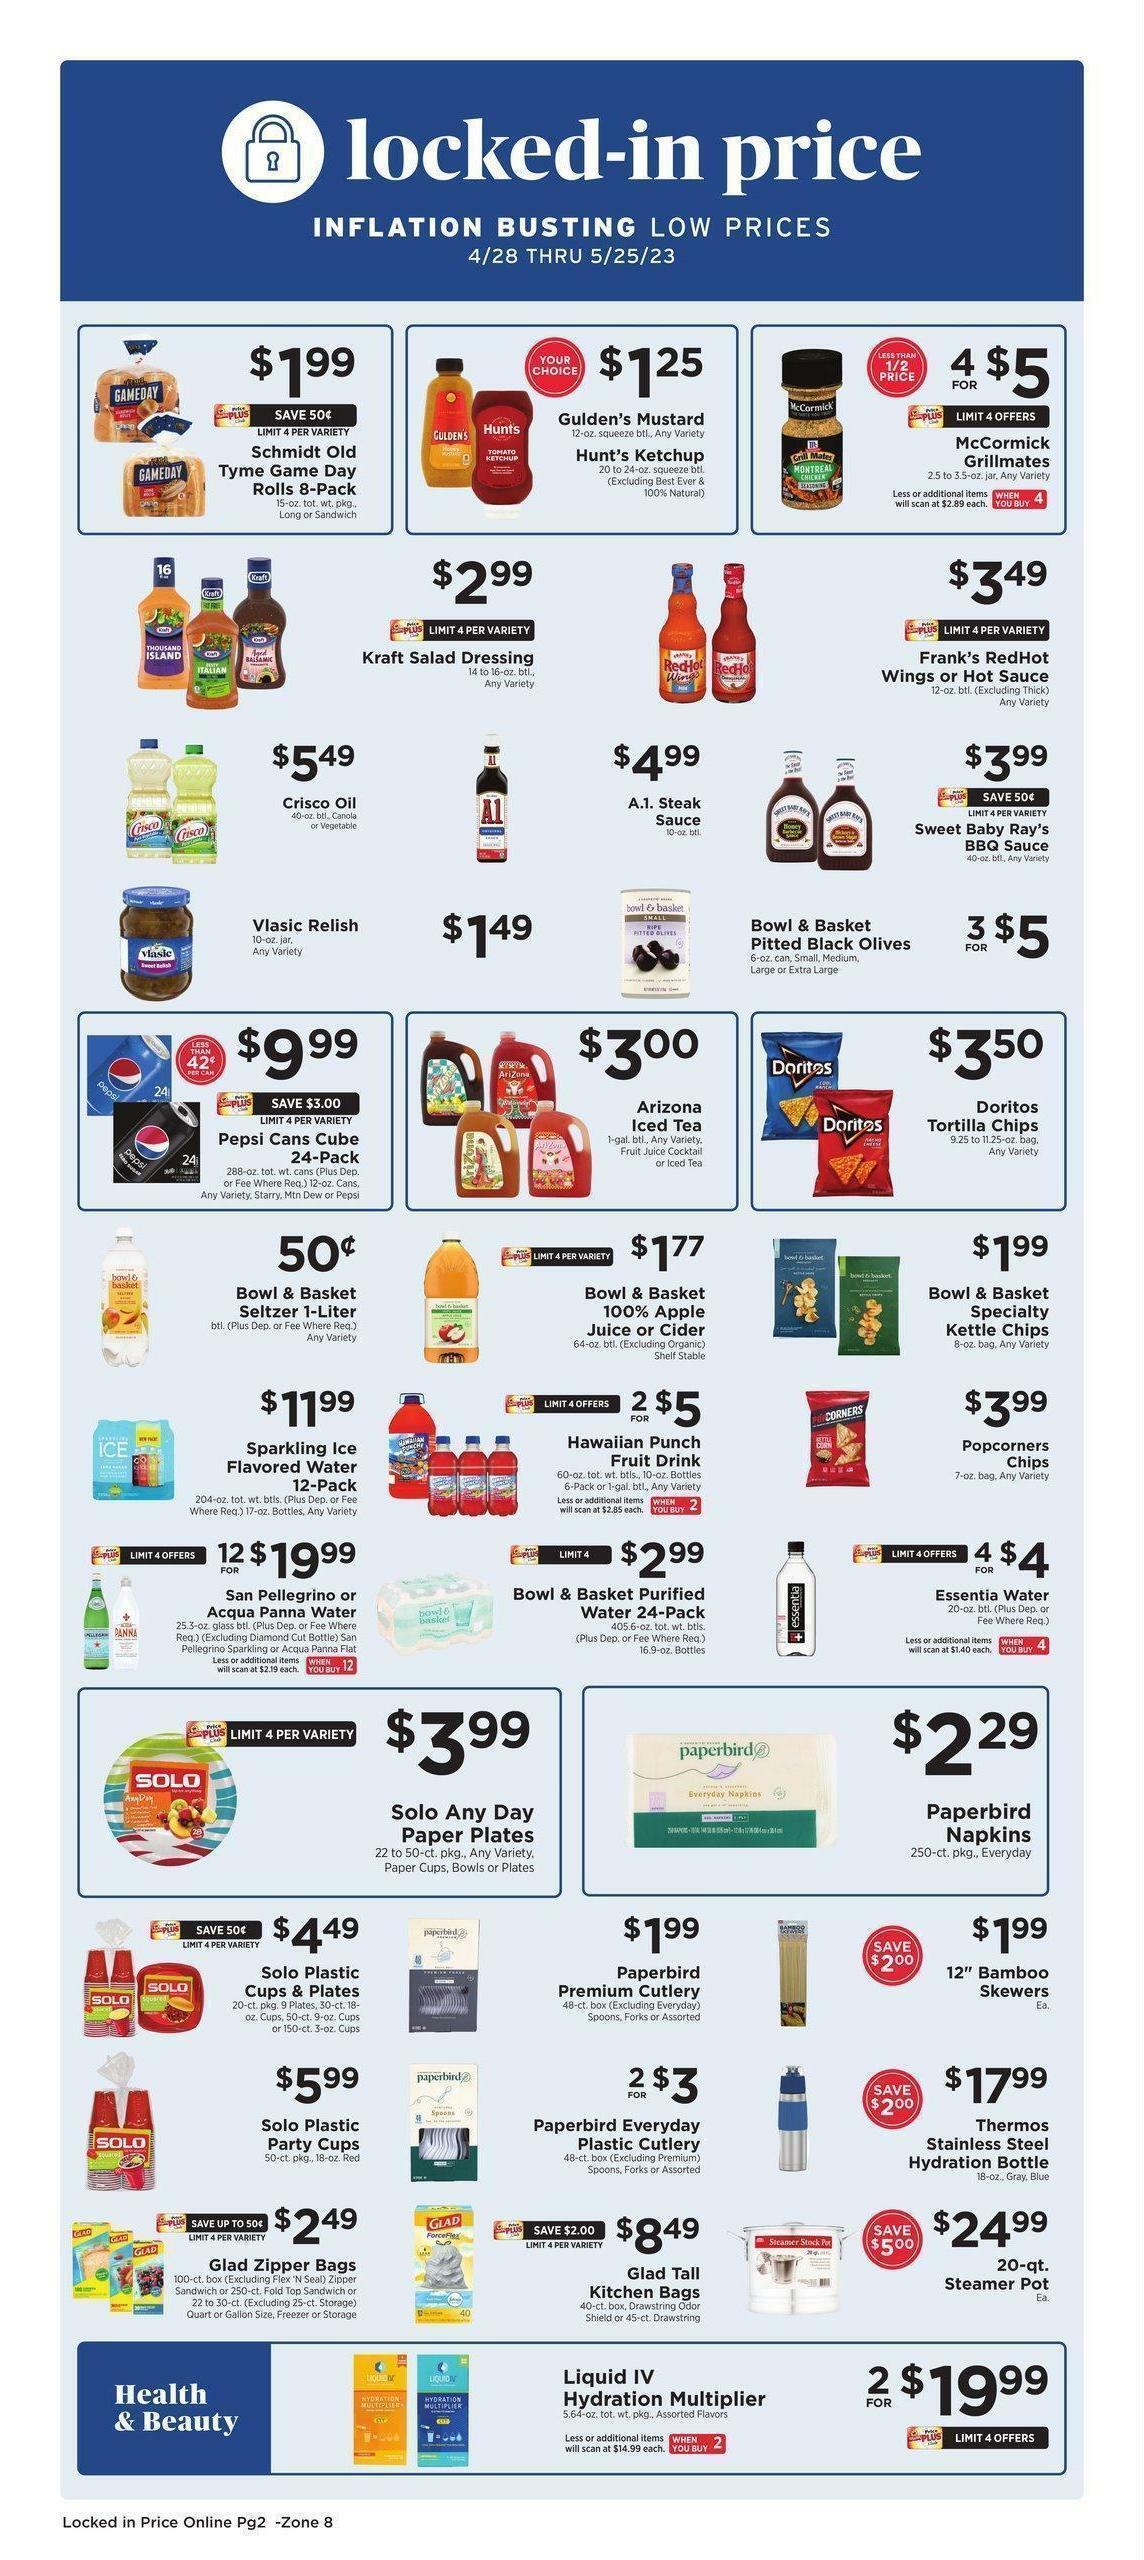 ShopRite Weekly Ad from May 5